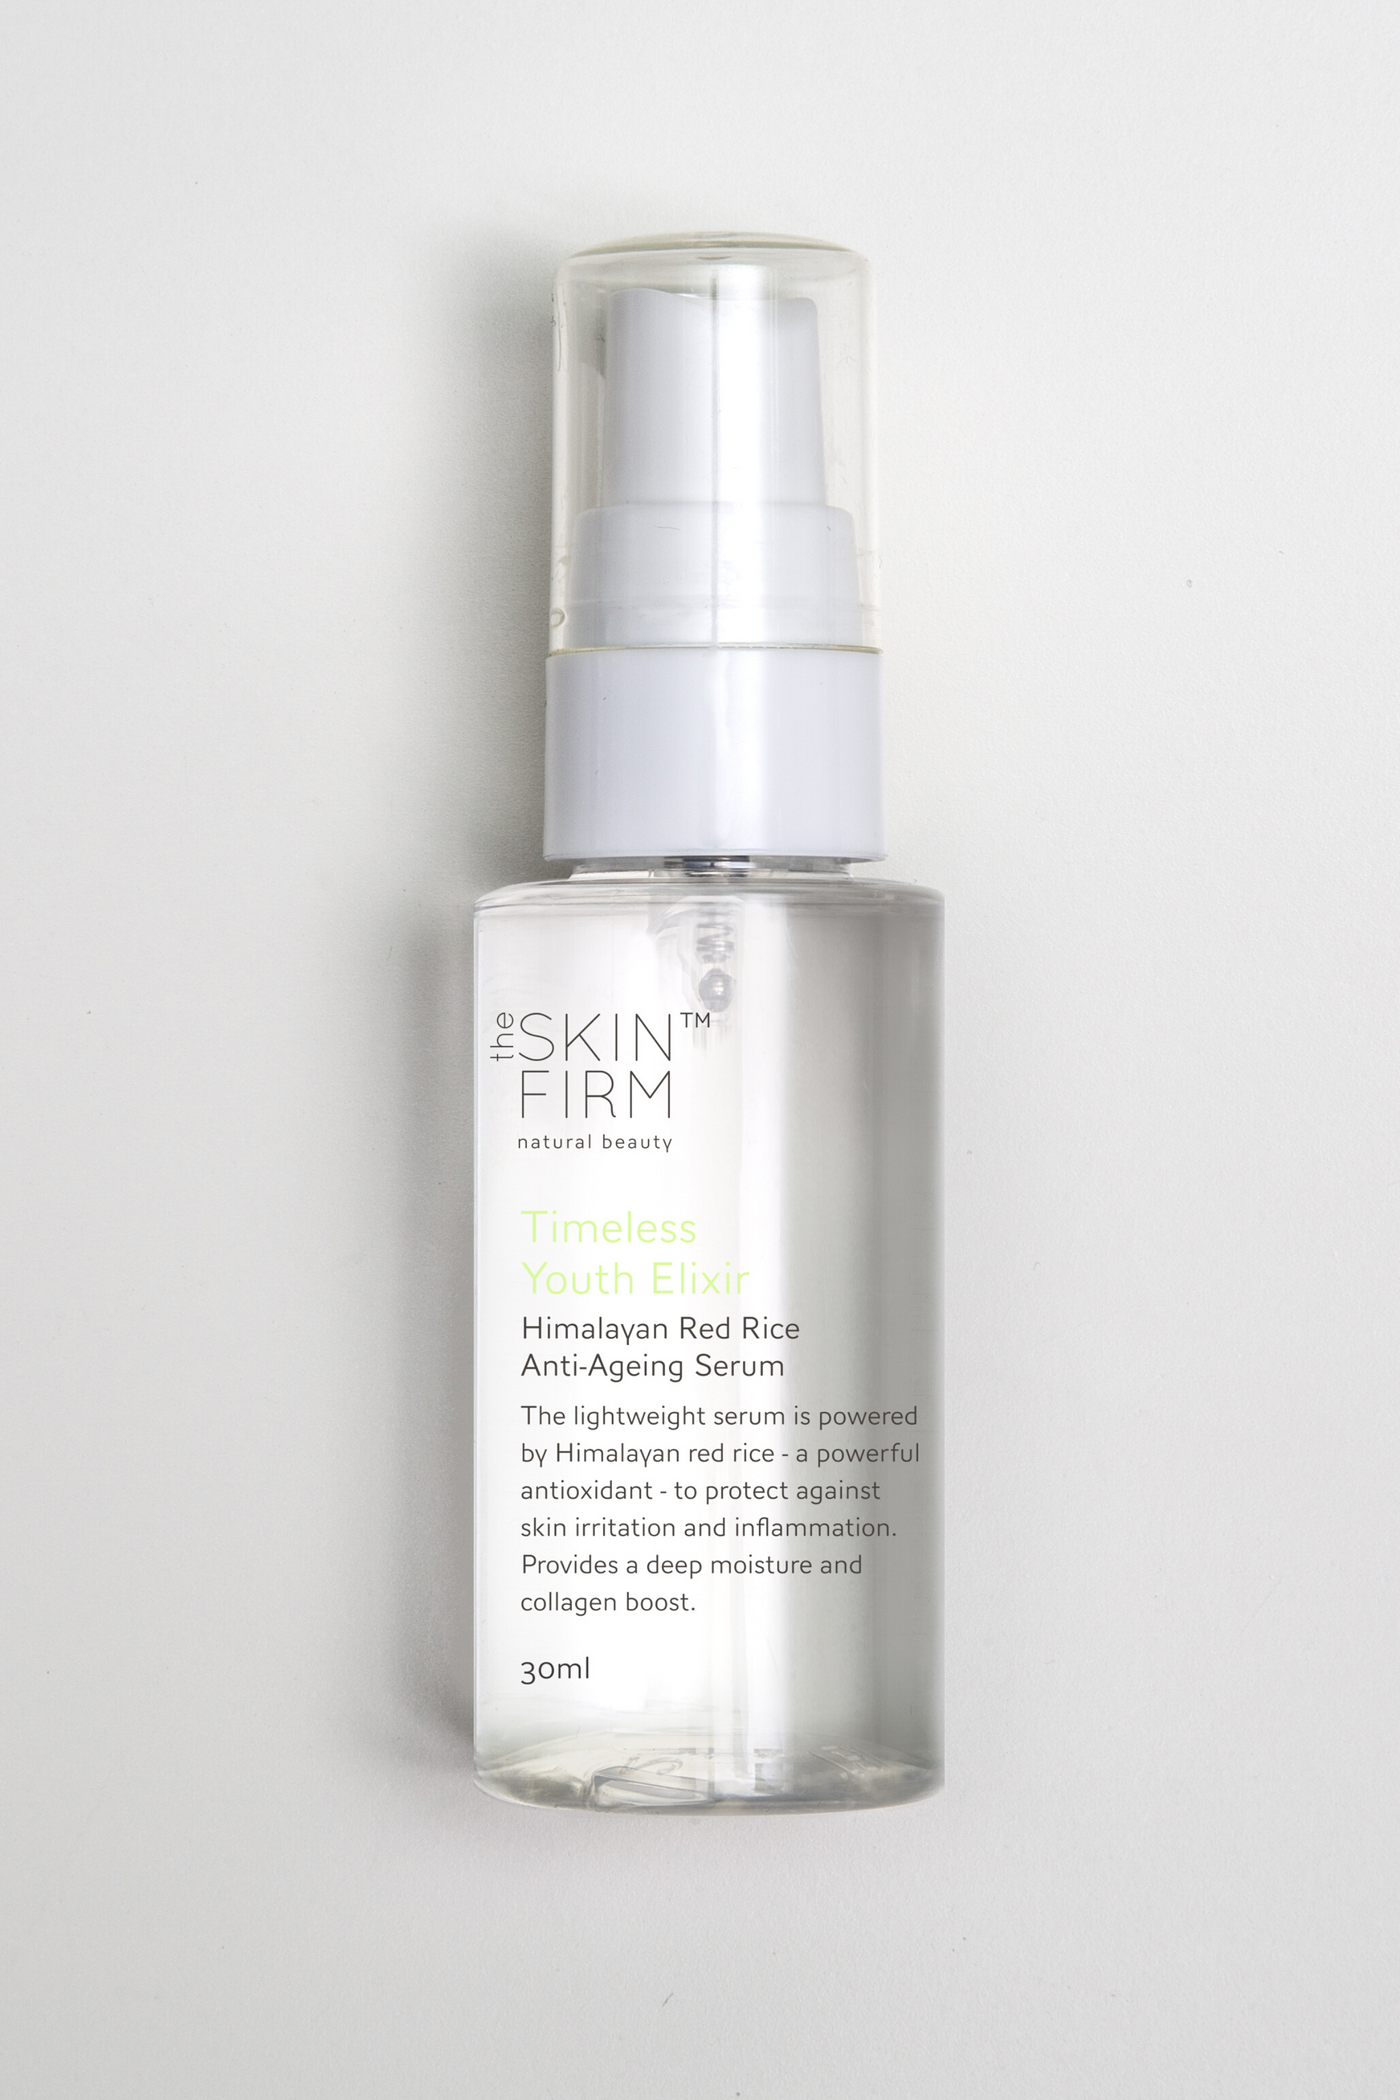 The Skin Firm Timeless Youth Elixir